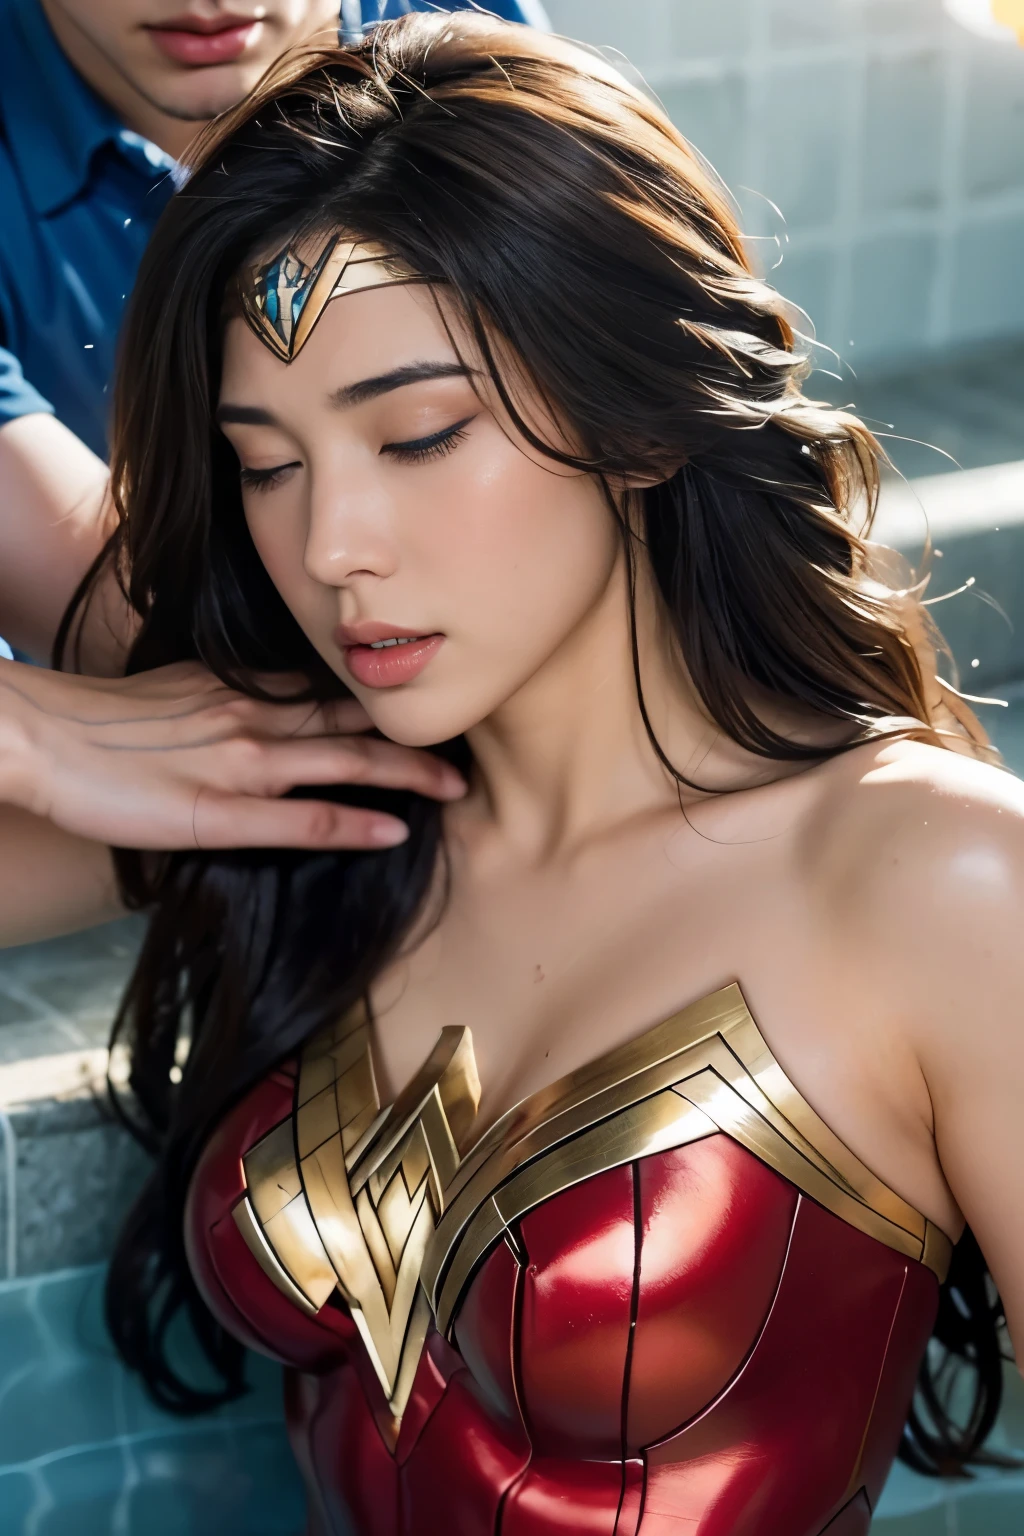 in water,perfect wonder woman costume,whole body,Having your head held down under water,Being submerged in a pool,Drowning in the pool,Face submerged in water,in waterに潜る,Submerge your face in water,In the pool,Inside the fountain,Soaked in water,Soaking wet wonder woman,sleeping face,Close ~ eyes,open your mouth,tired face,face of suffering,sleeping face,Soaking wet hair,Soaked Hair,wet body,fight the men,surrounded by men,,caught between men,Being licked by men,Intertwining with men, Attacked by men,assaulted by men,Being bullied by guys,being sexually abused by a man,Captured by a man,Being detained by a man、touch your face,、Hair is pulled hard,My head is grabbed,Grab my head,brown hair,  masterpiece、beautiful girl、fine 目、puffy eyes、highest quality, 超High resolution, (reality: 1.4), movie lighting,super beautiful、beautiful skin、(超reality的な)、(High resolution)、(8K)、(very detailed)、(beautiful and fine 目)、(Super detailed)、 detailed face、slanted bangeshi hair、brown hair、20-year-old、Wonder Woman Cosplay